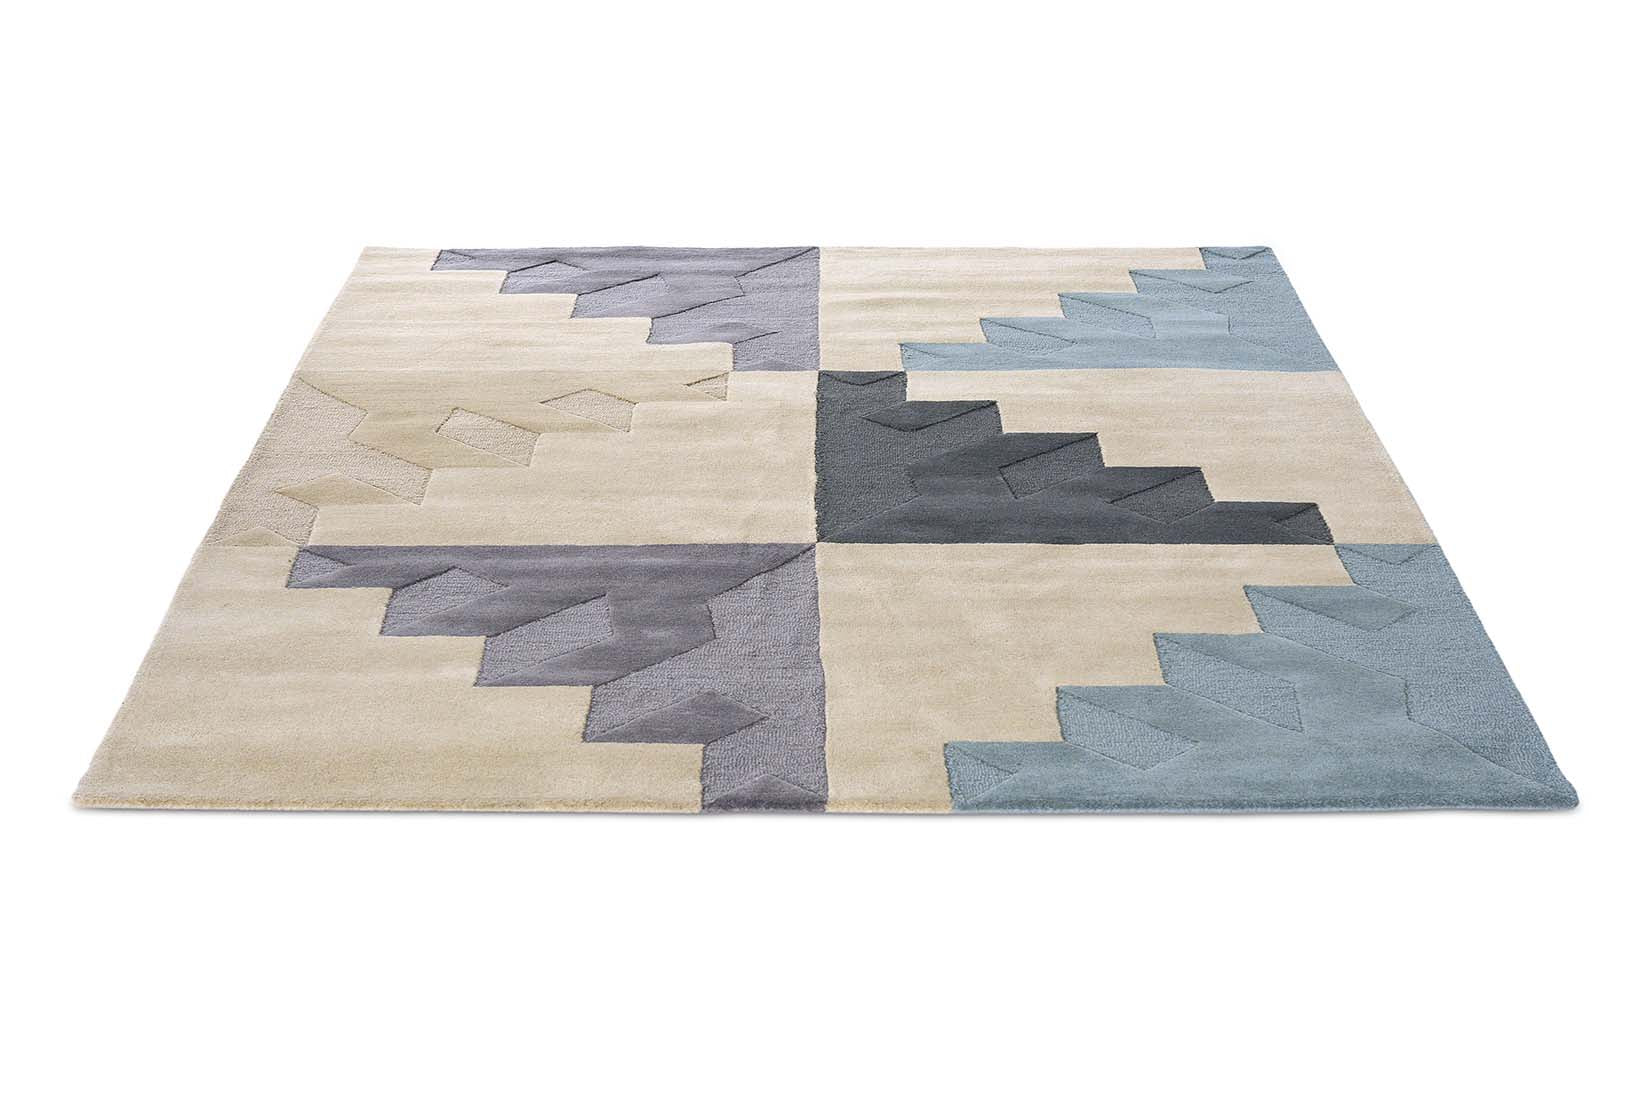 Geometric rug in shades of beige, grey, and navy